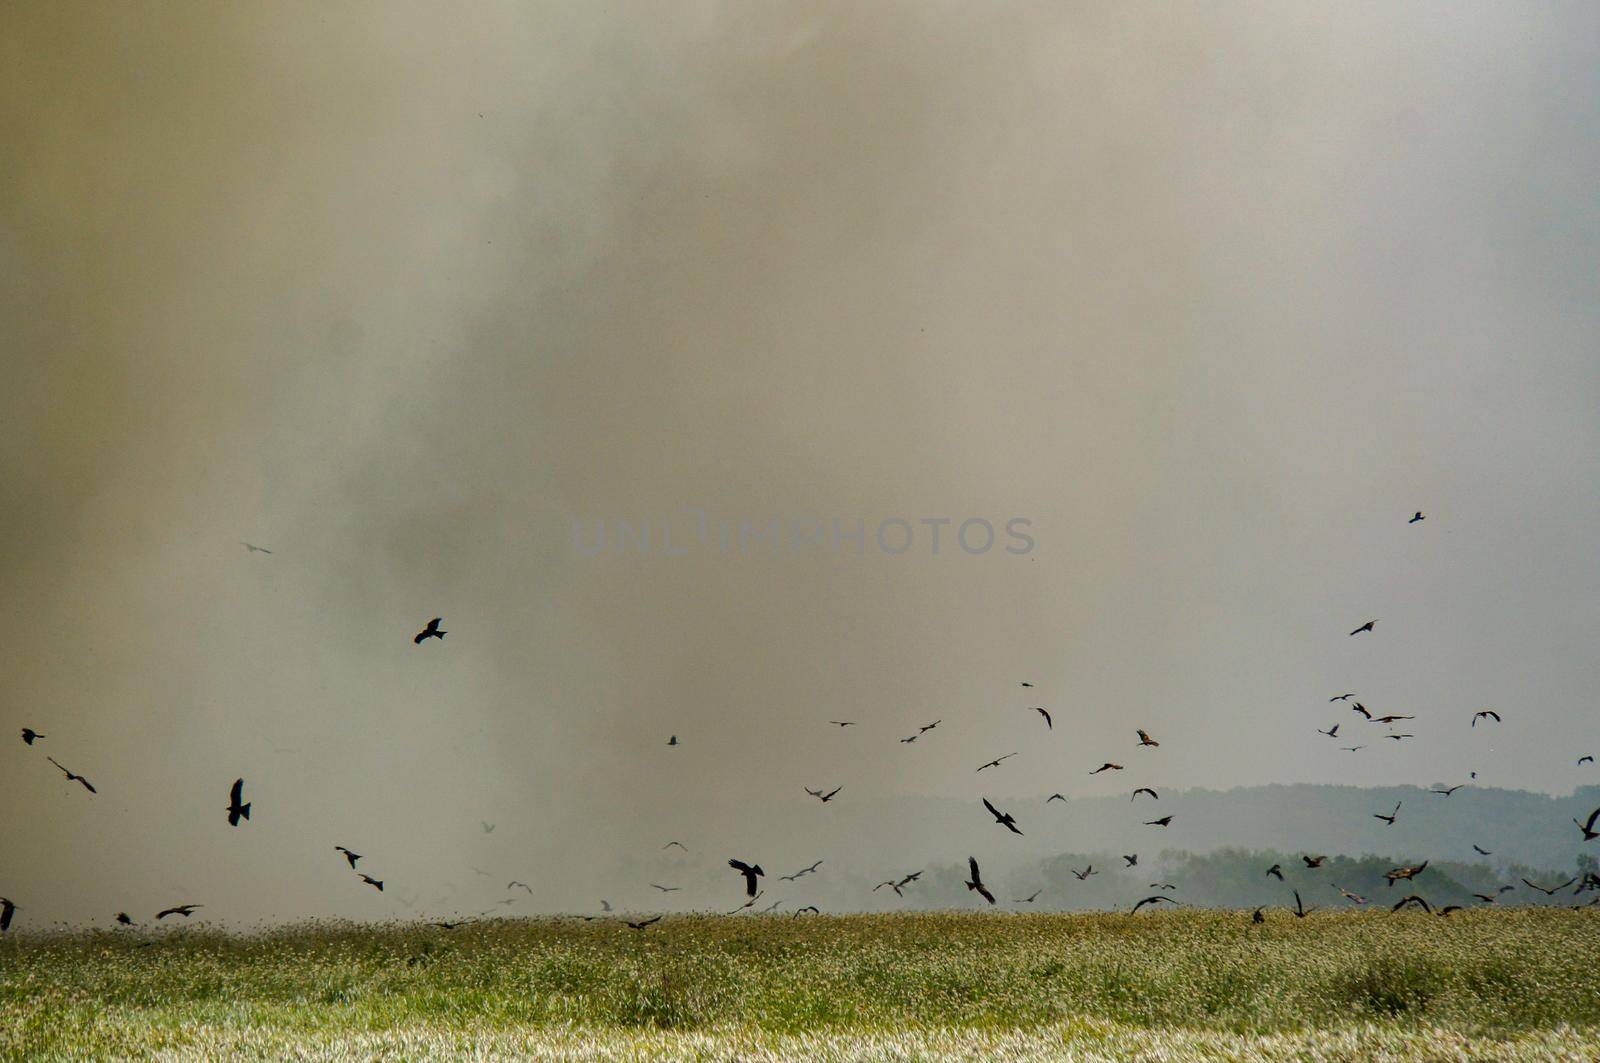 controlled Bushfire in Kakadu National Park, with diffrent birds, Northern Territory, Australia by bettercallcurry